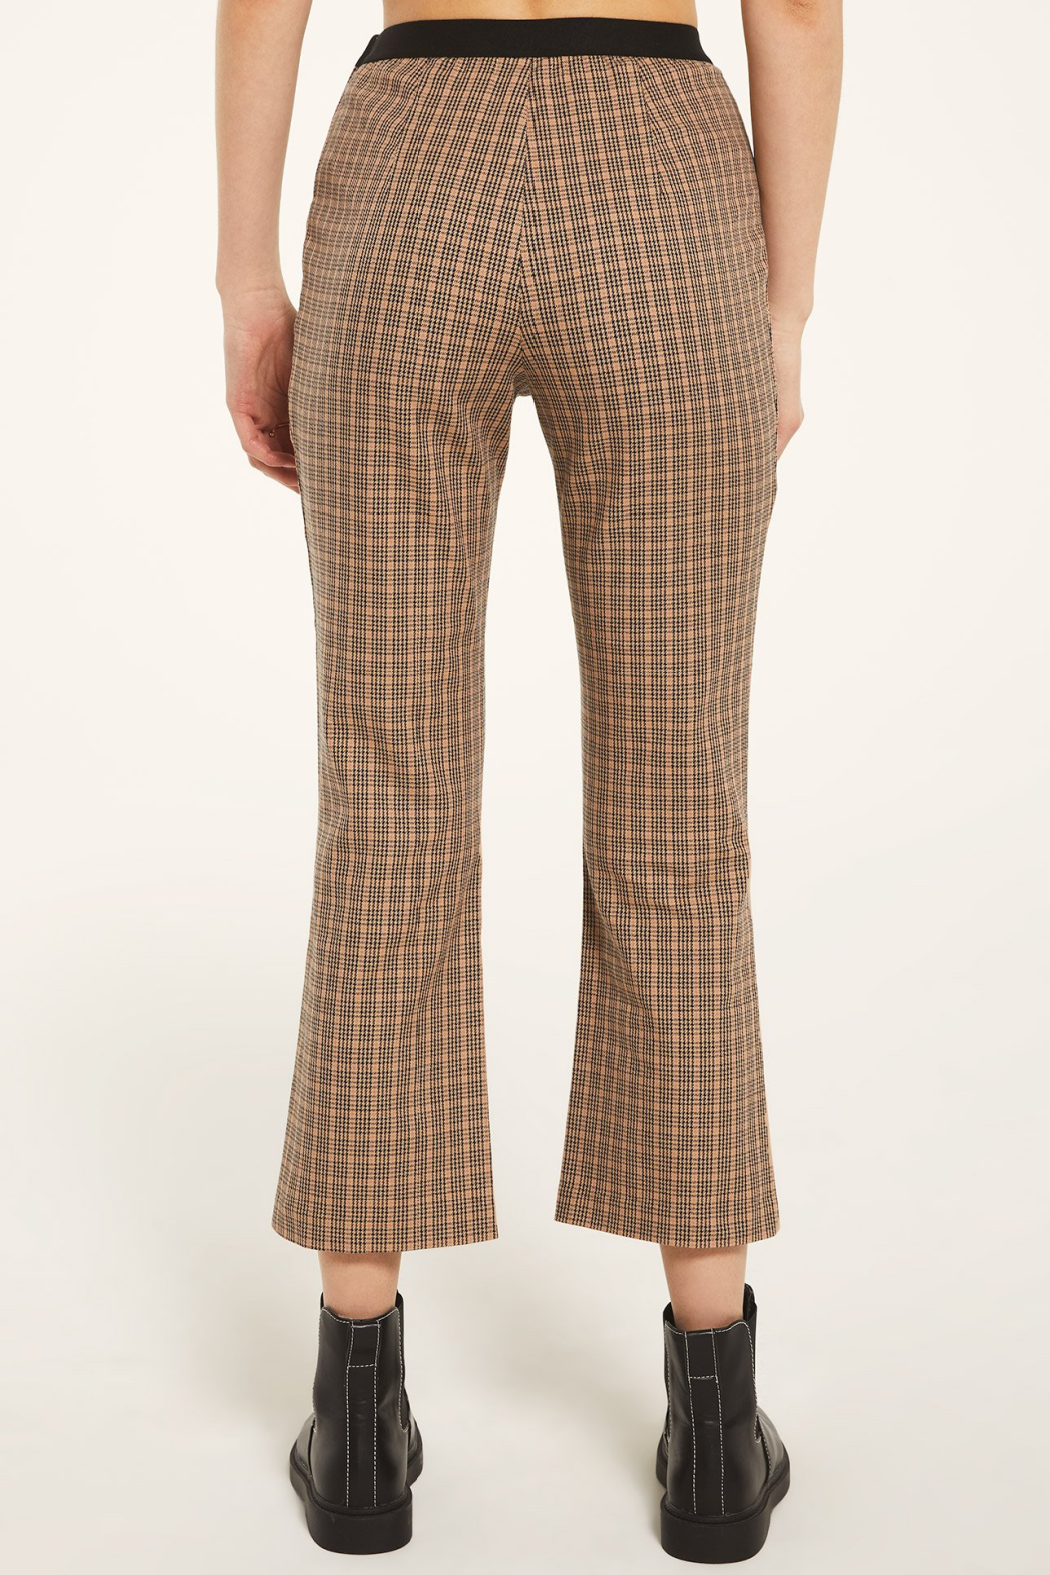 Olympia Plush Pant – The Old Mill